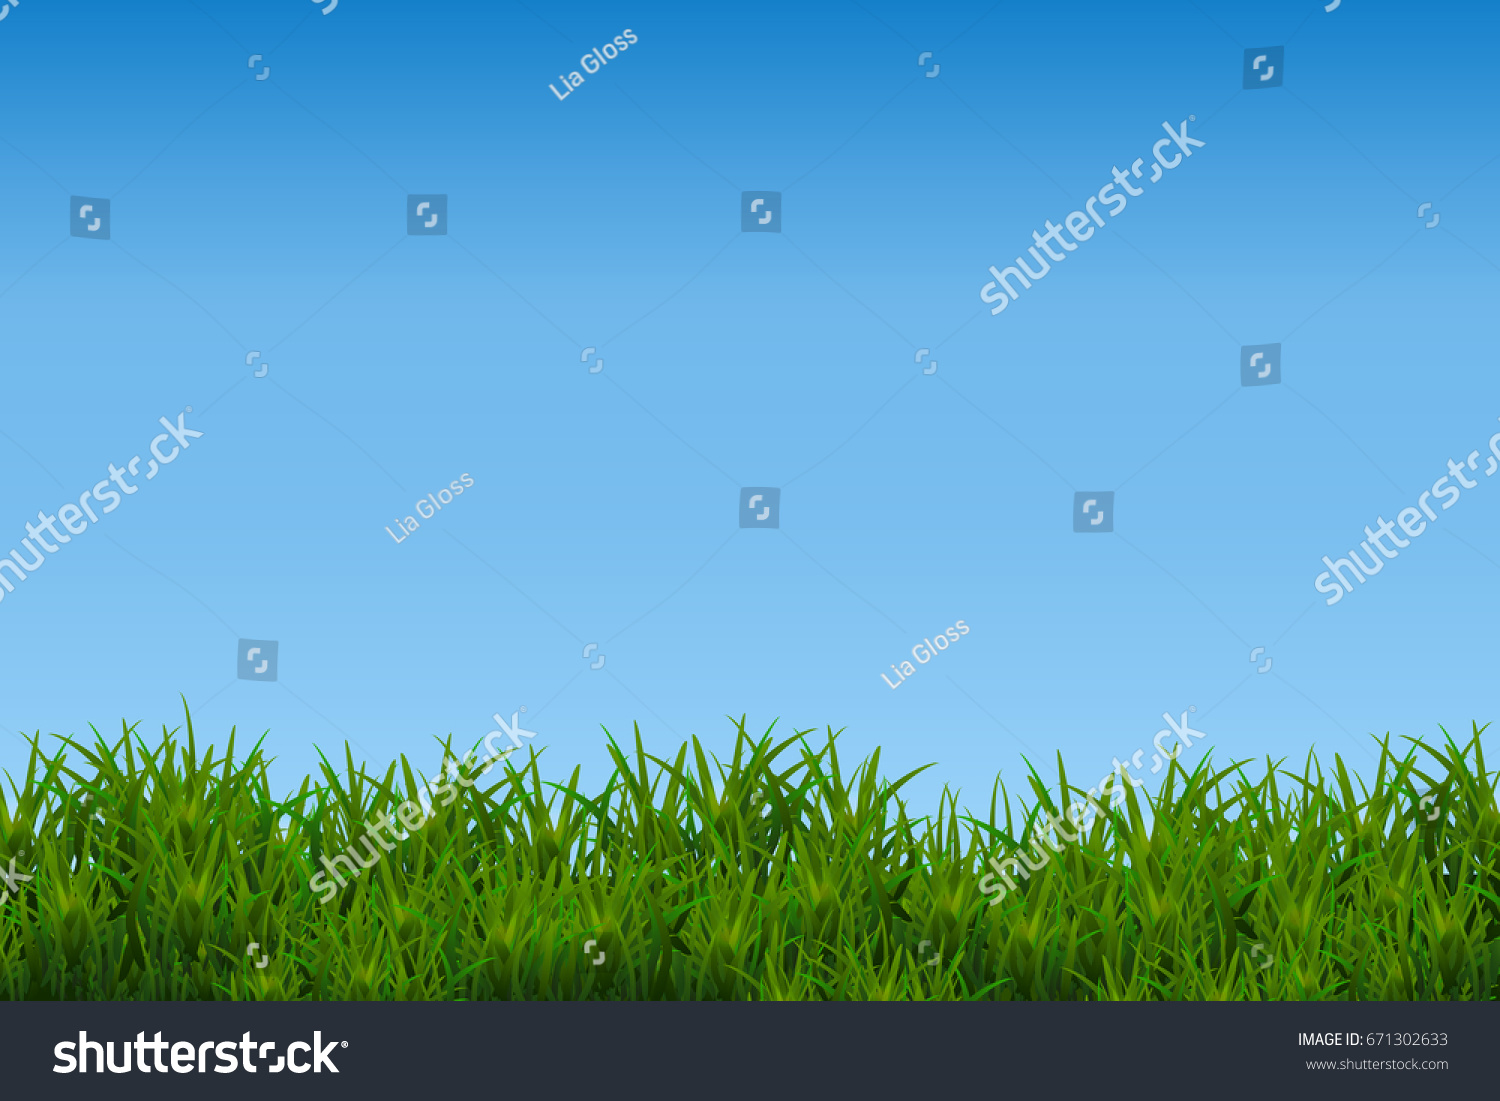 Green Glossy Grass Isolated On Blue Stock Illustration 671302633 ...